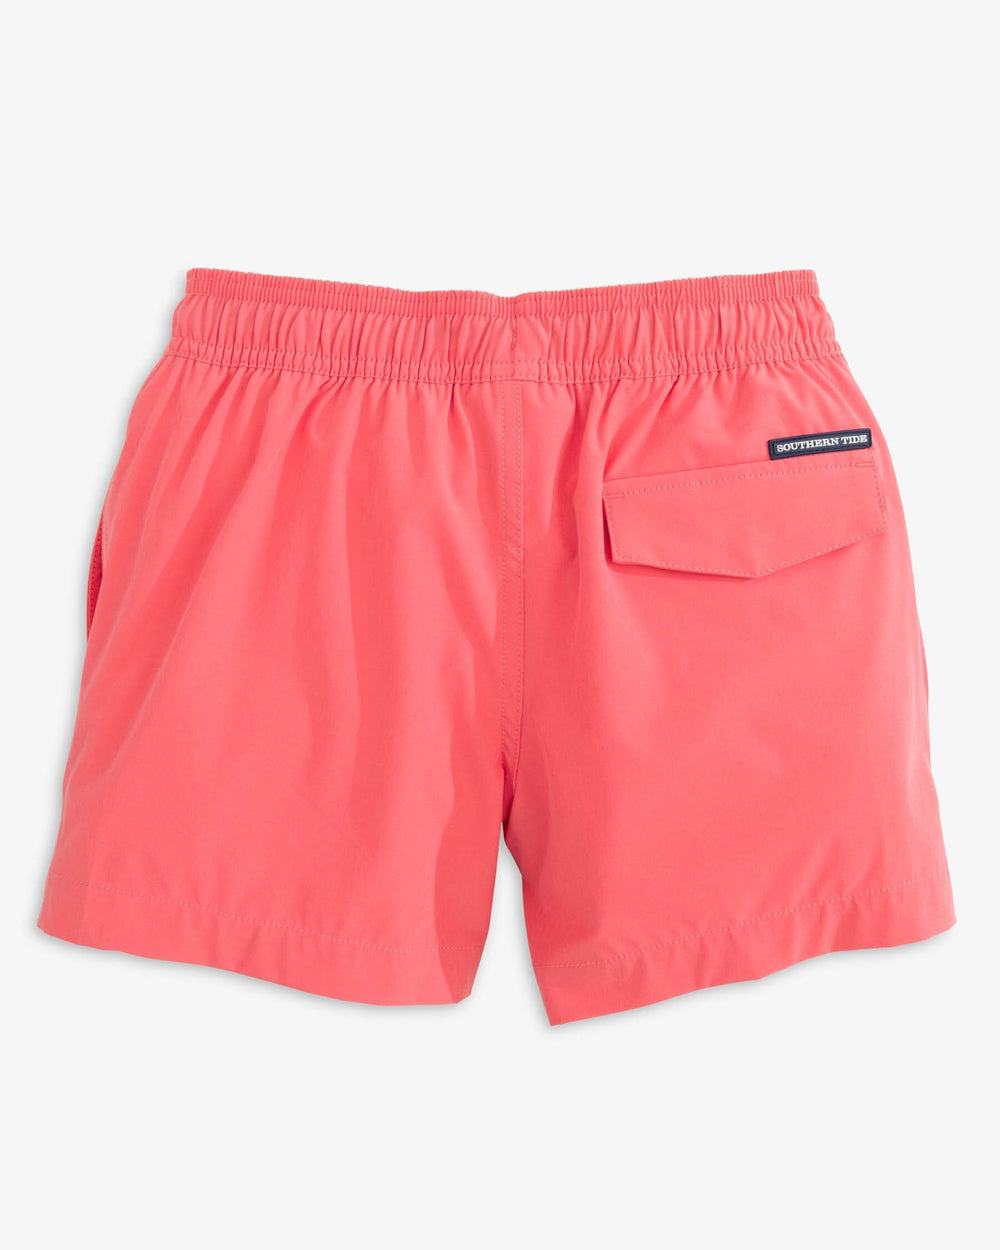 The back view of the Southern Tide Boys Solid Swim Truck 2 0 by Southern Tide - Sunkist Coral